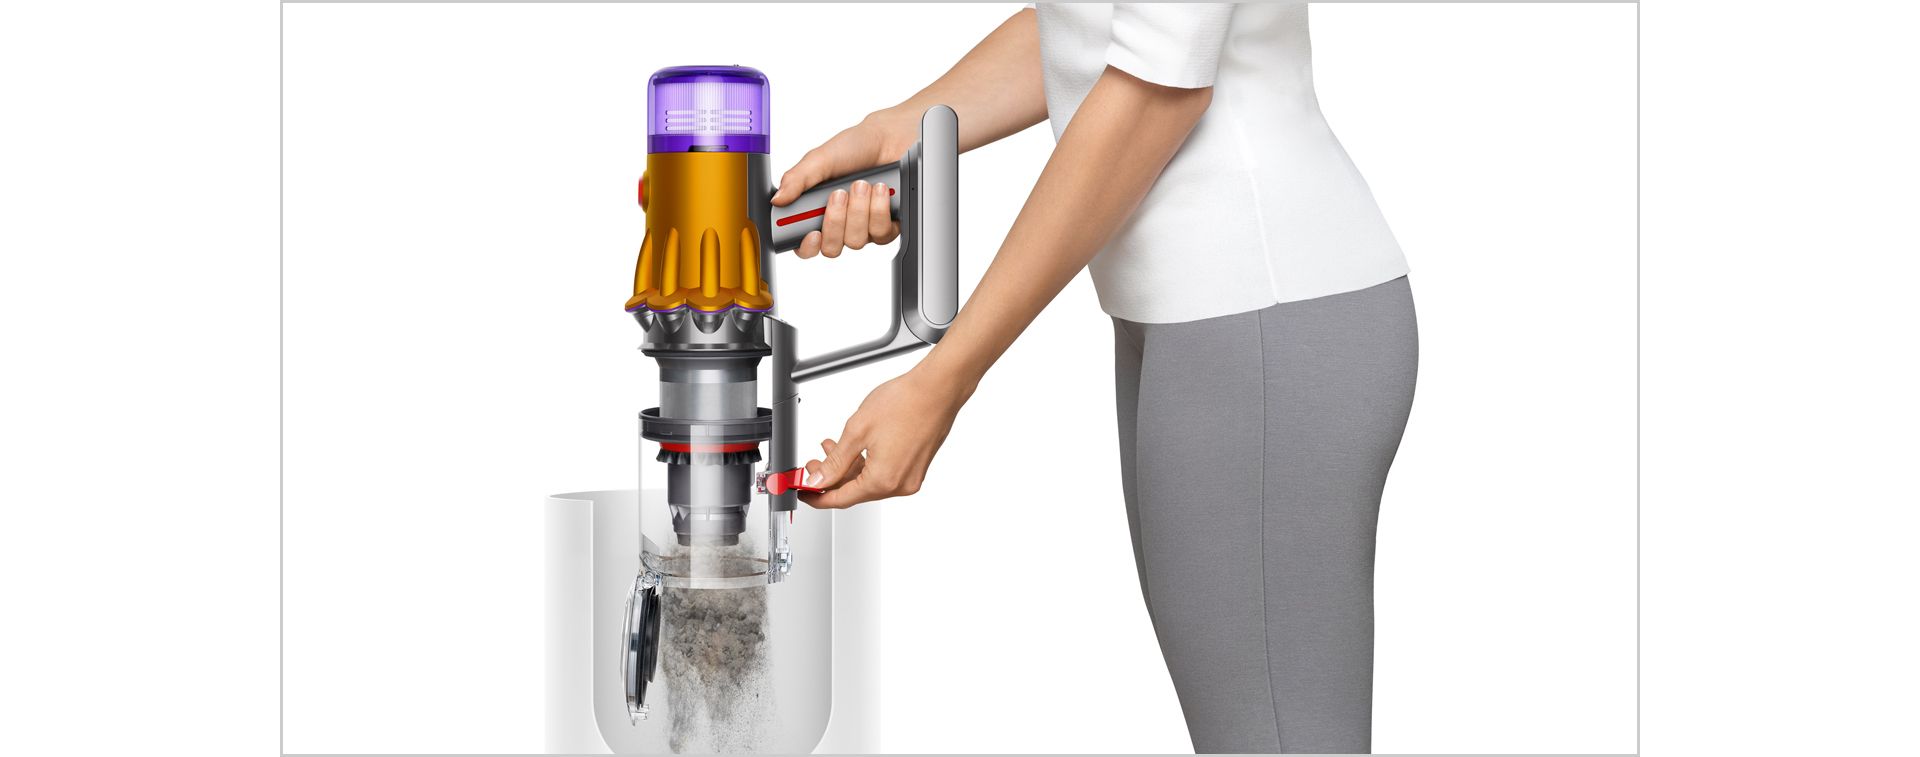 Dyson's V12 Detect Vacuum Cleaner Is $100 Off on  - TheStreet